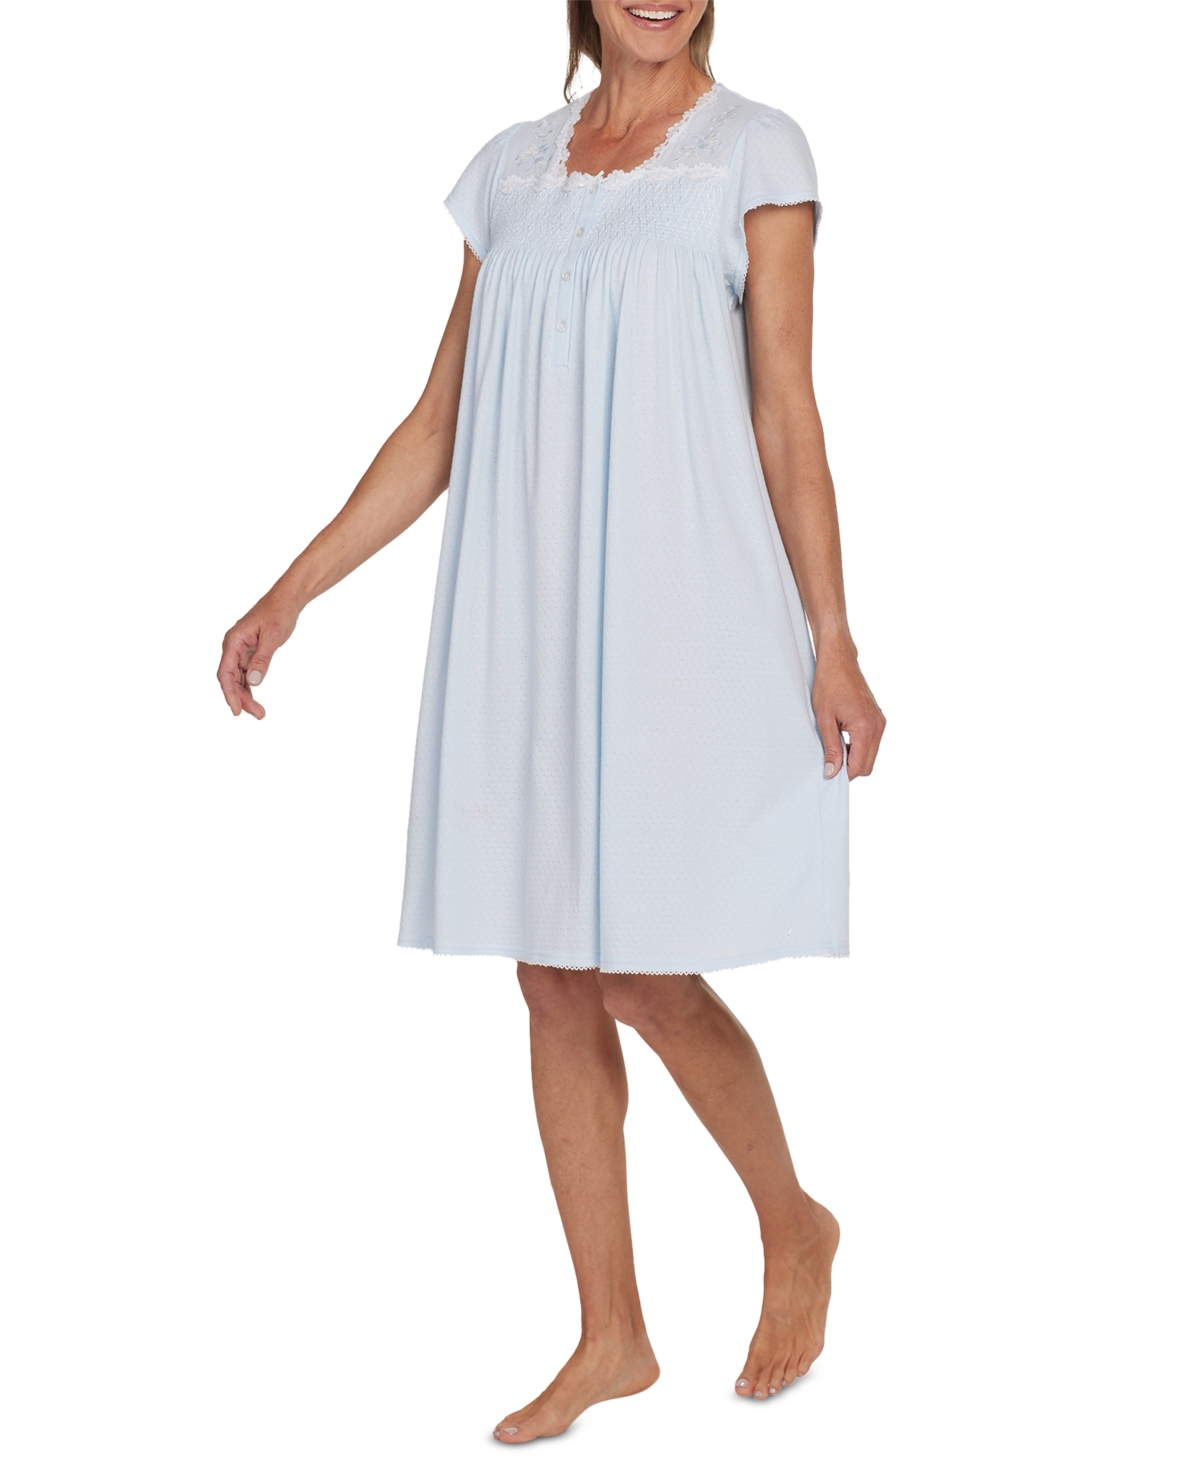 Women's Embroidered Short-Sleeve Nightgown - Blue